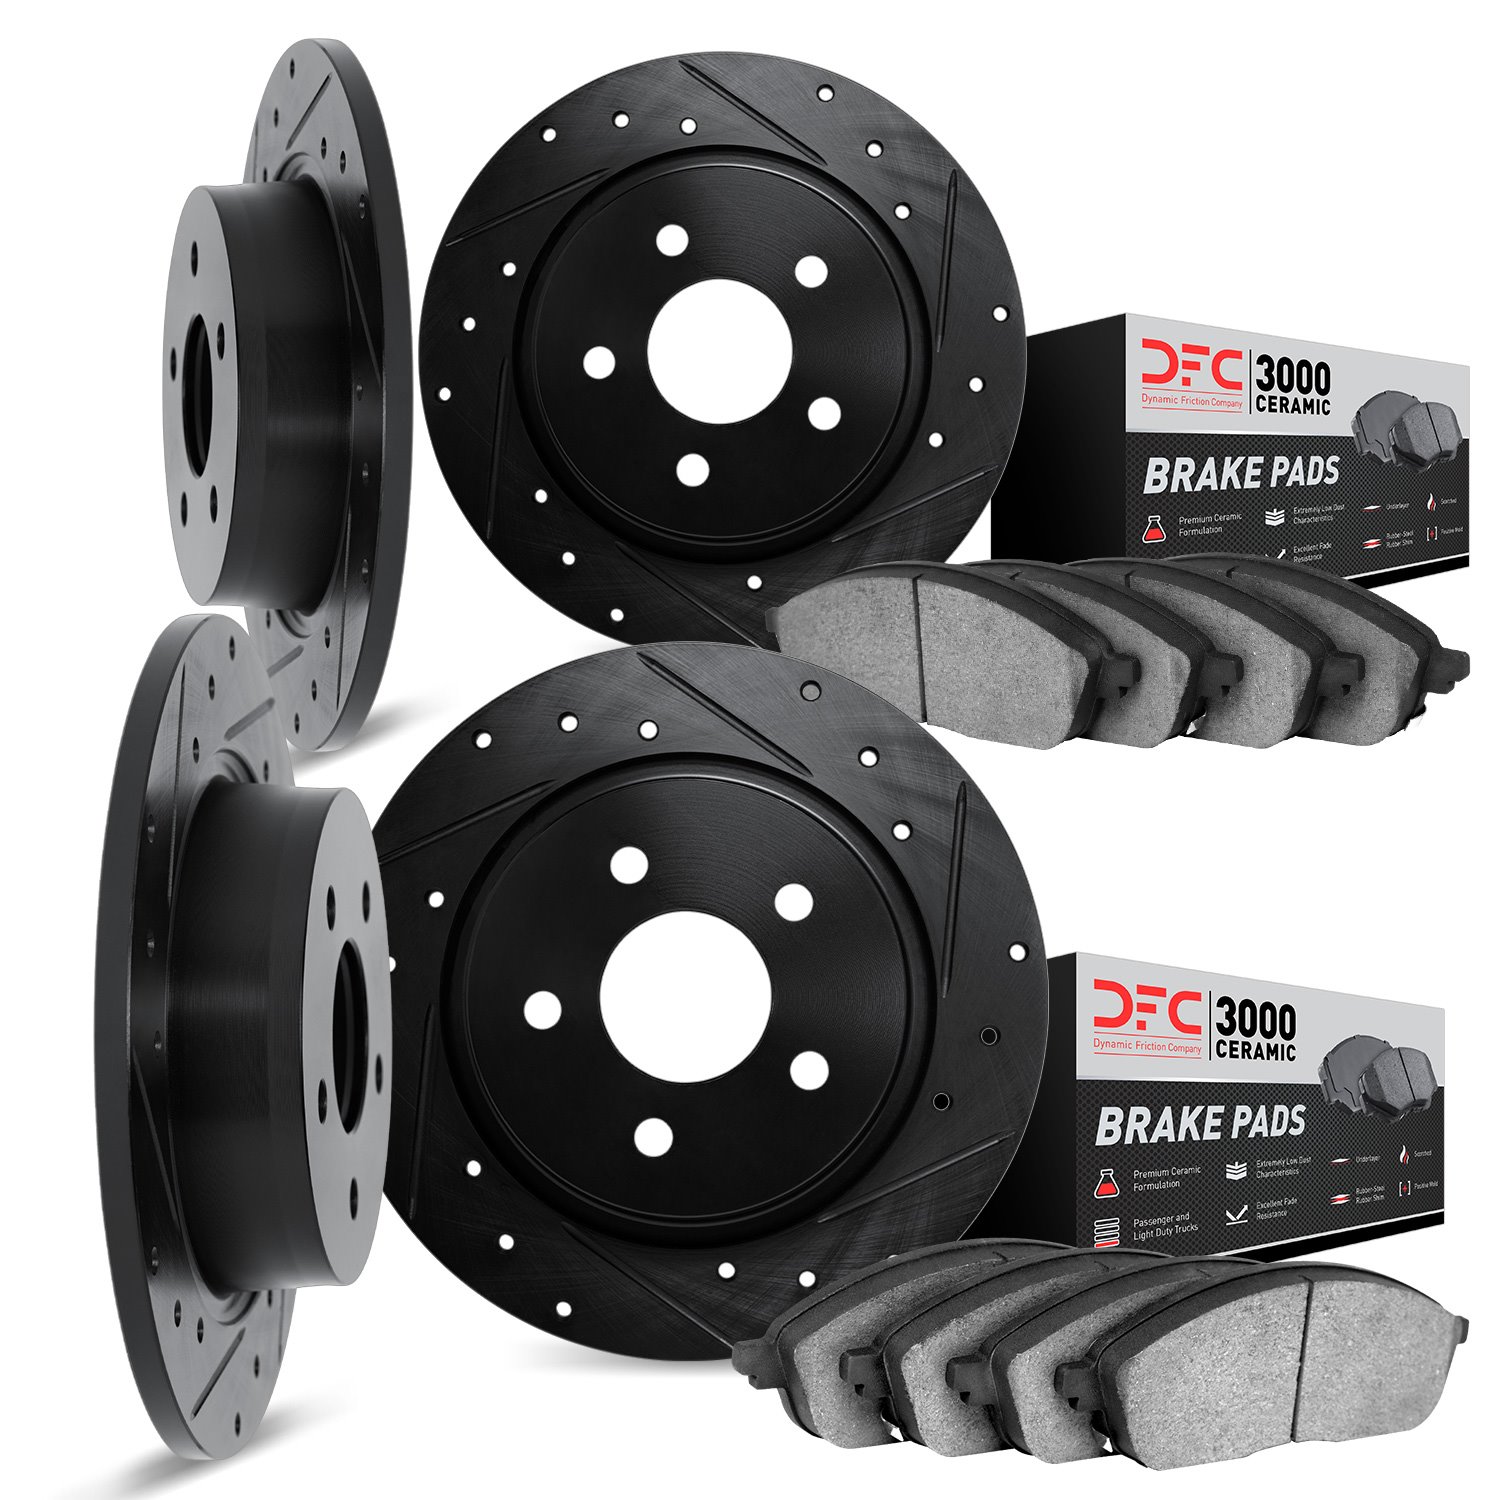 8304-63002 Drilled/Slotted Brake Rotors with 3000-Series Ceramic Brake Pads Kit [Black], 1968-1976 Mercedes-Benz, Position: Fron